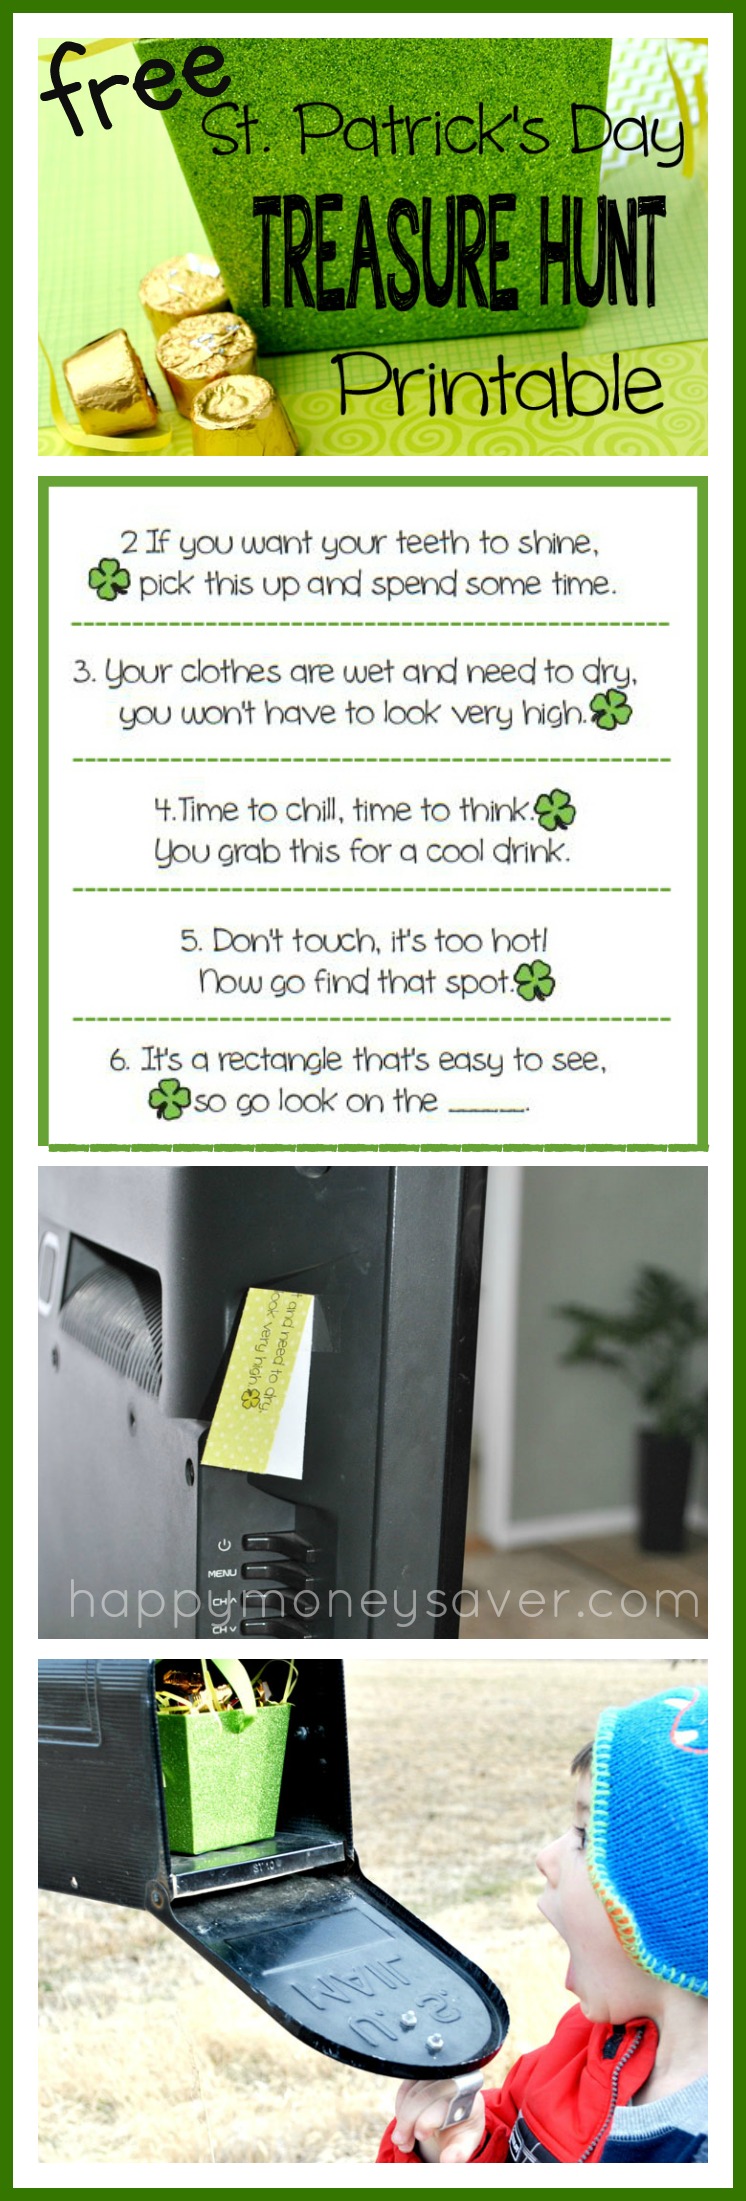 This is so much FUN!! A FREE printable St. Patricks Day Treasure hunt with printable clues. I can't wait to do this for my kids. happymoneysaver.com